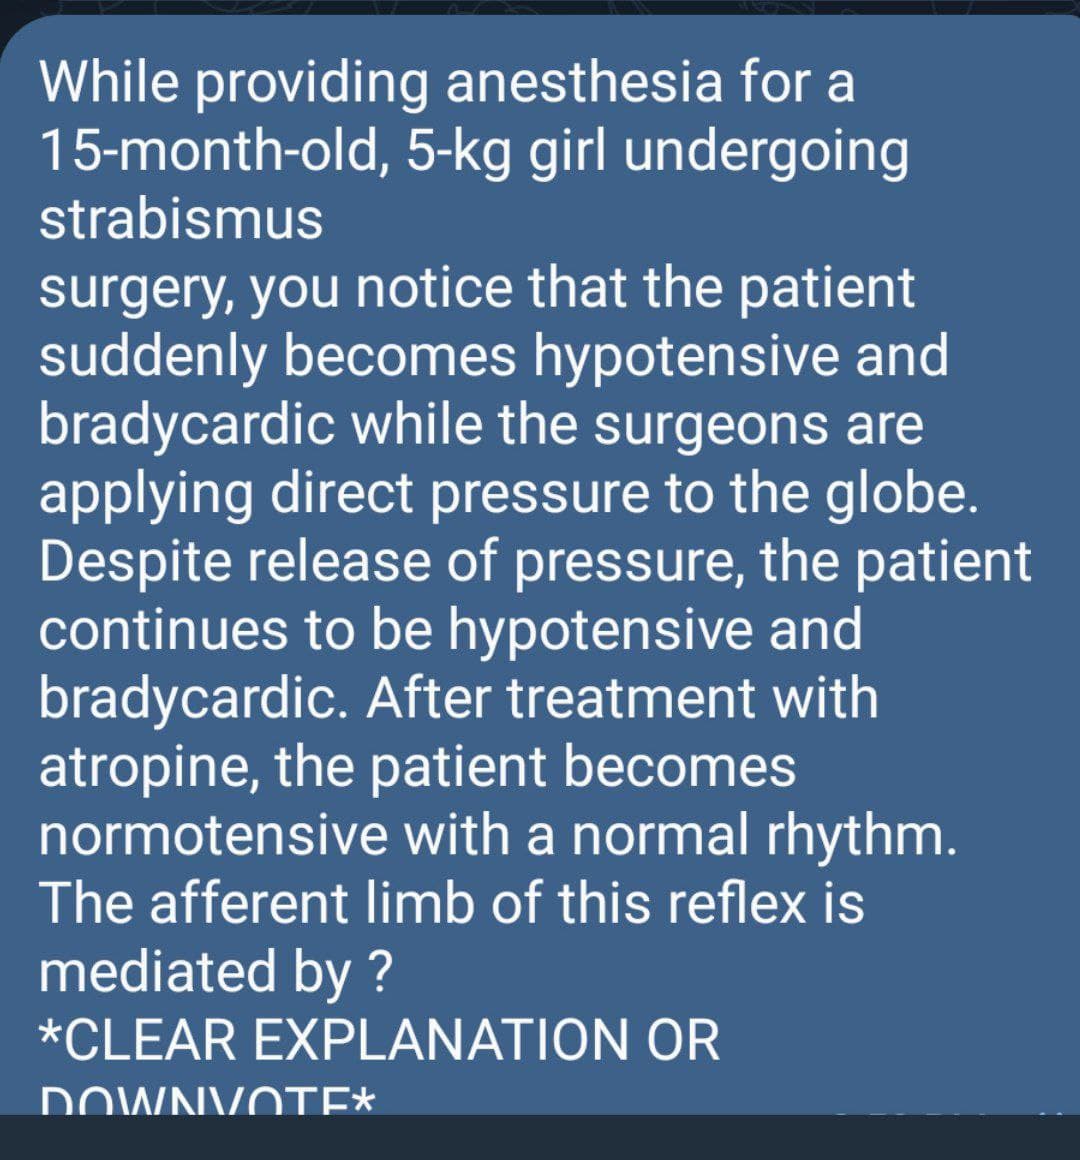 While providing anesthesia for a
15-month-old, 5-kg girl undergoing
strabismus
surgery, you notice that the patient
suddenly becomes hypotensive and
bradycardic while the surgeons are
applying direct pressure to the globe.
Despite release of pressure, the patient
continues to be hypotensive and
bradycardic. After treatment with
atropine, the patient becomes
normotensive with a normal rhythm.
The afferent limb of this reflex is
mediated by ?
*CLEAR EXPLANATION OR
DOWNVOTE*
